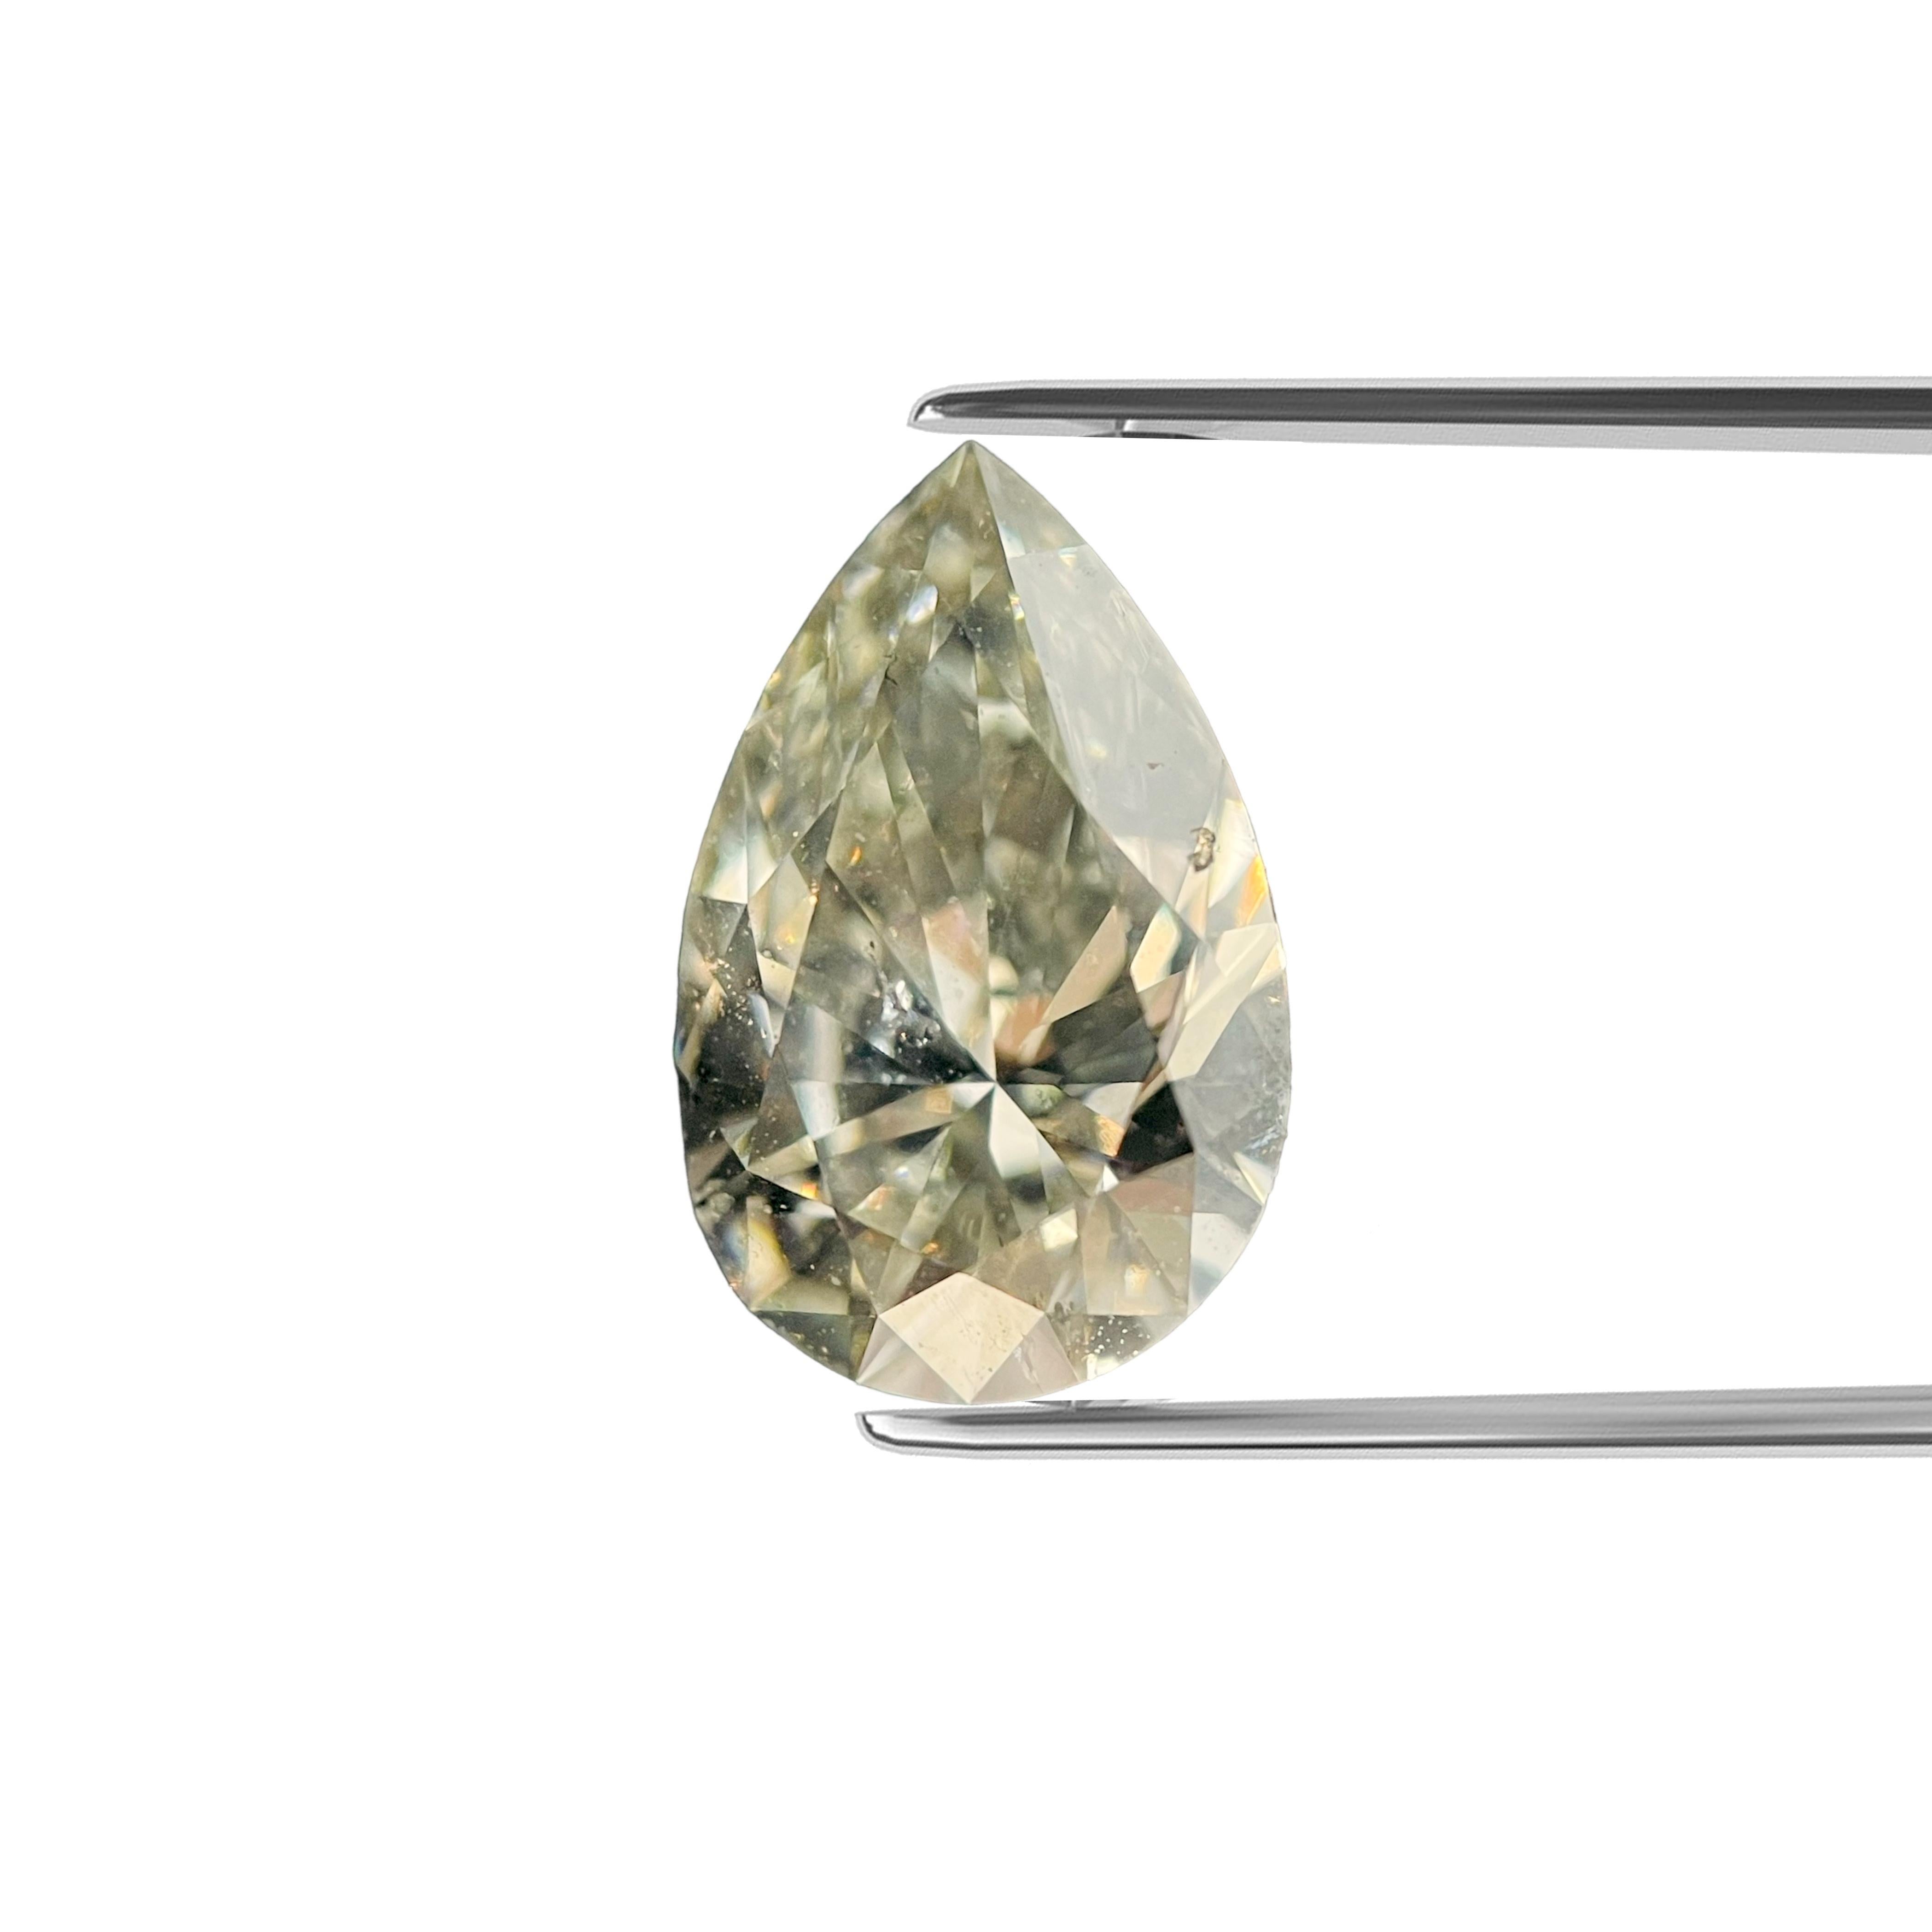 ITEM DESCRIPTION

ID #:	NY55472
Stone Shape:	PEAR BRILLIANT
Diamond Weight: 1.20ct
Clarity: SI2
Color: Fancy Gray-Yellowish Green 
Cut:	Excellent
Measurements: 9.25 x 5.95 x 3.61 mm
Depth %:	60.6%
Table %:	61%
Symmetry: Very Good
Polish: Excellent